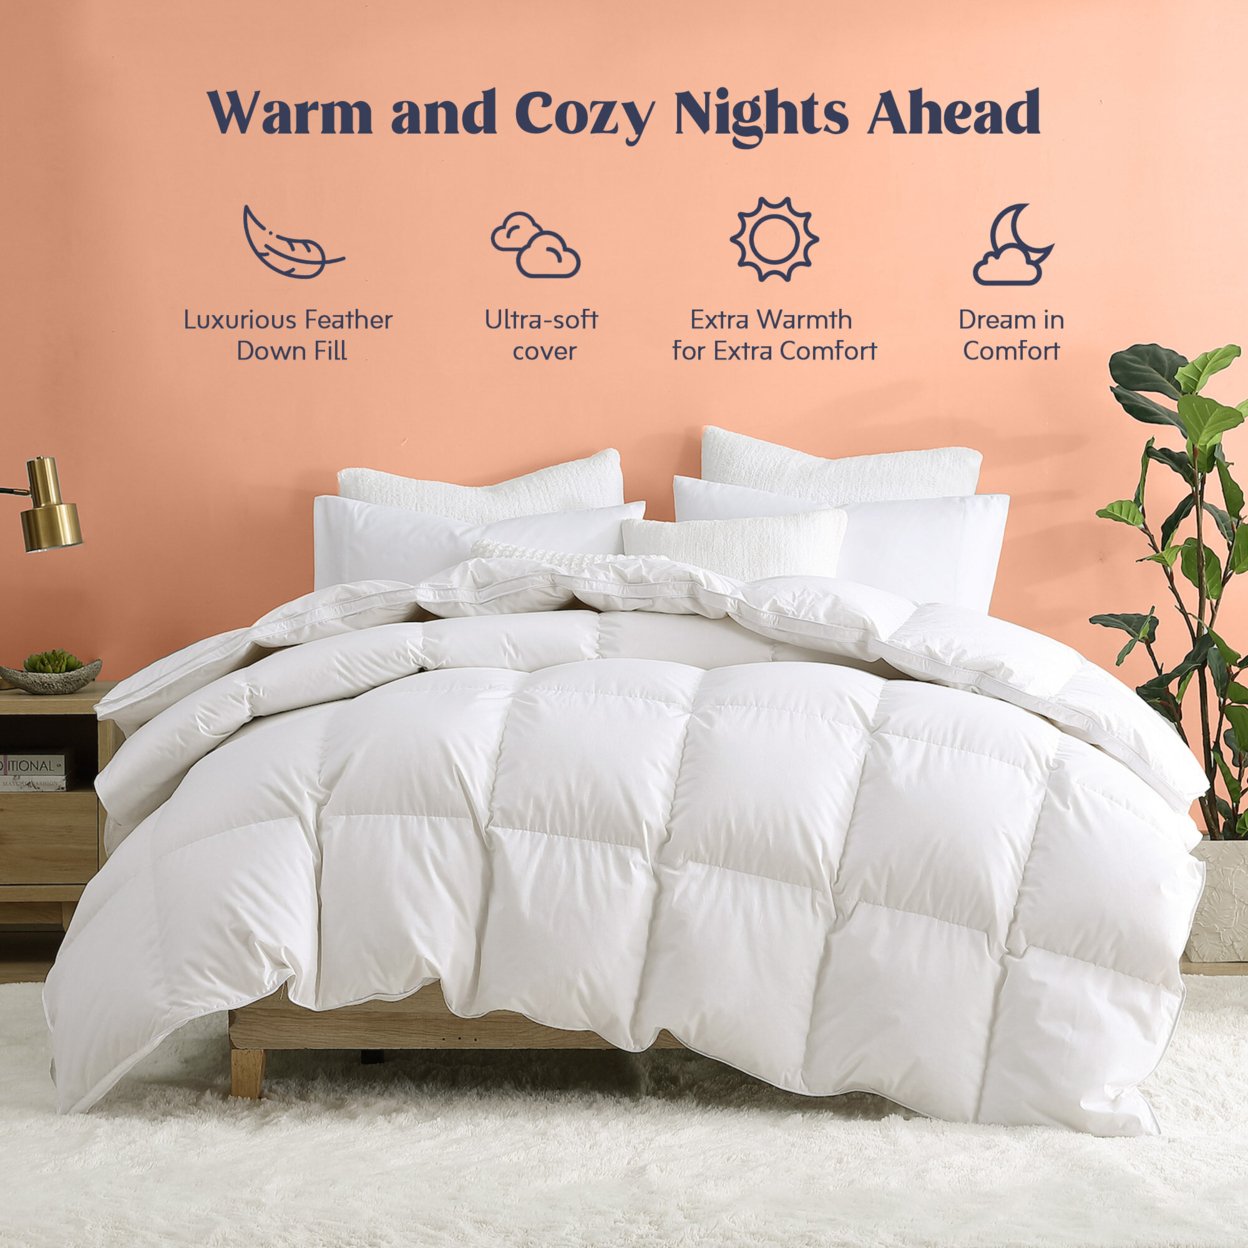 White Goose Down And Ultra Feather Comforter For Winter, Heavy Weight Comforter - KING, White